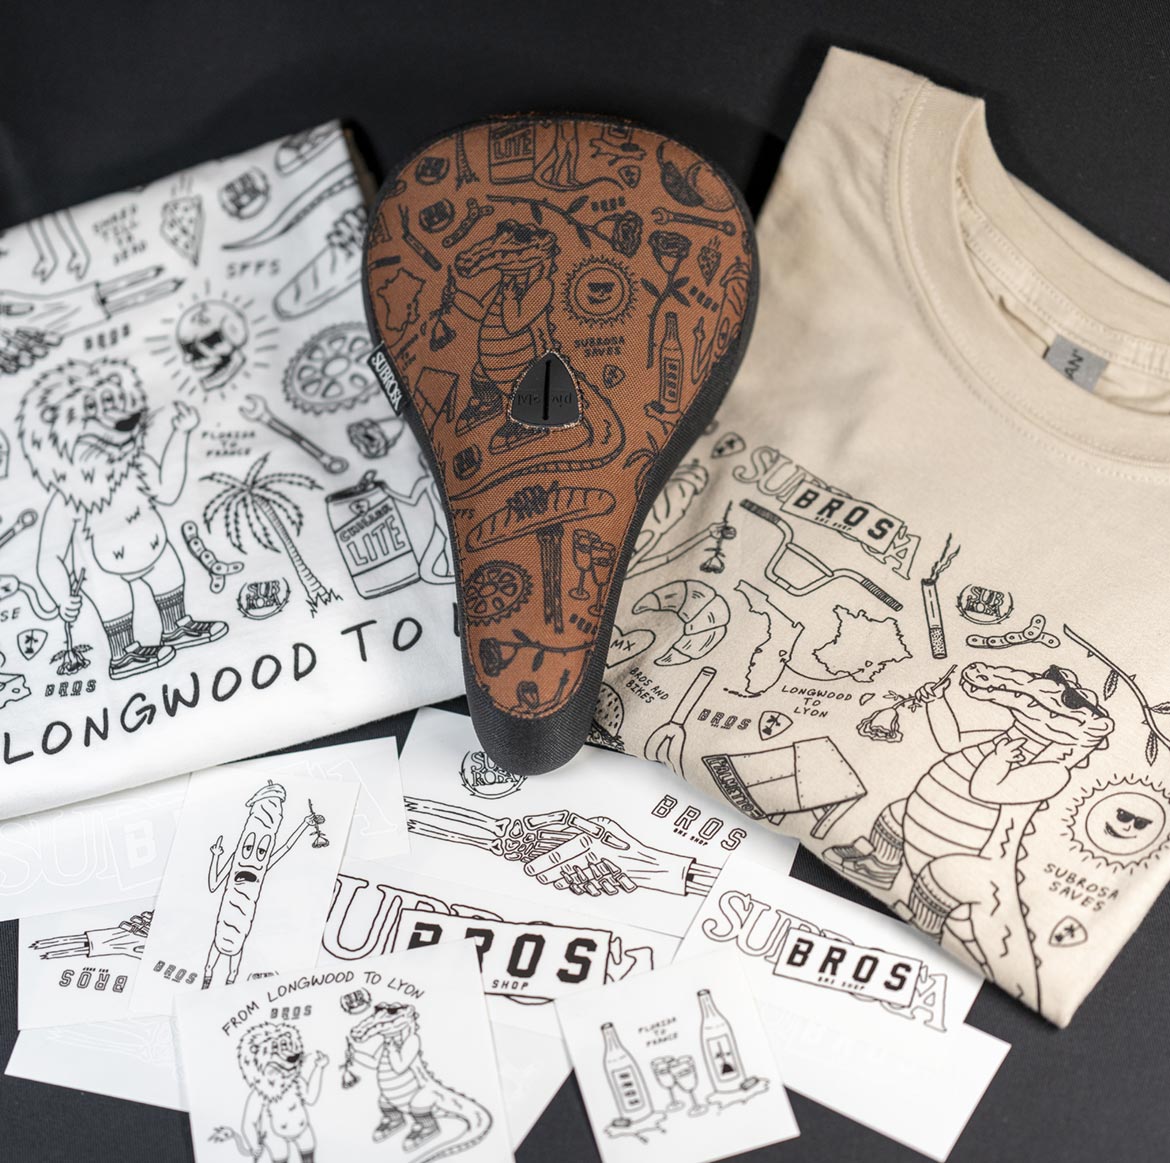 SUBROSA BROS COLLAB PRODUCTS